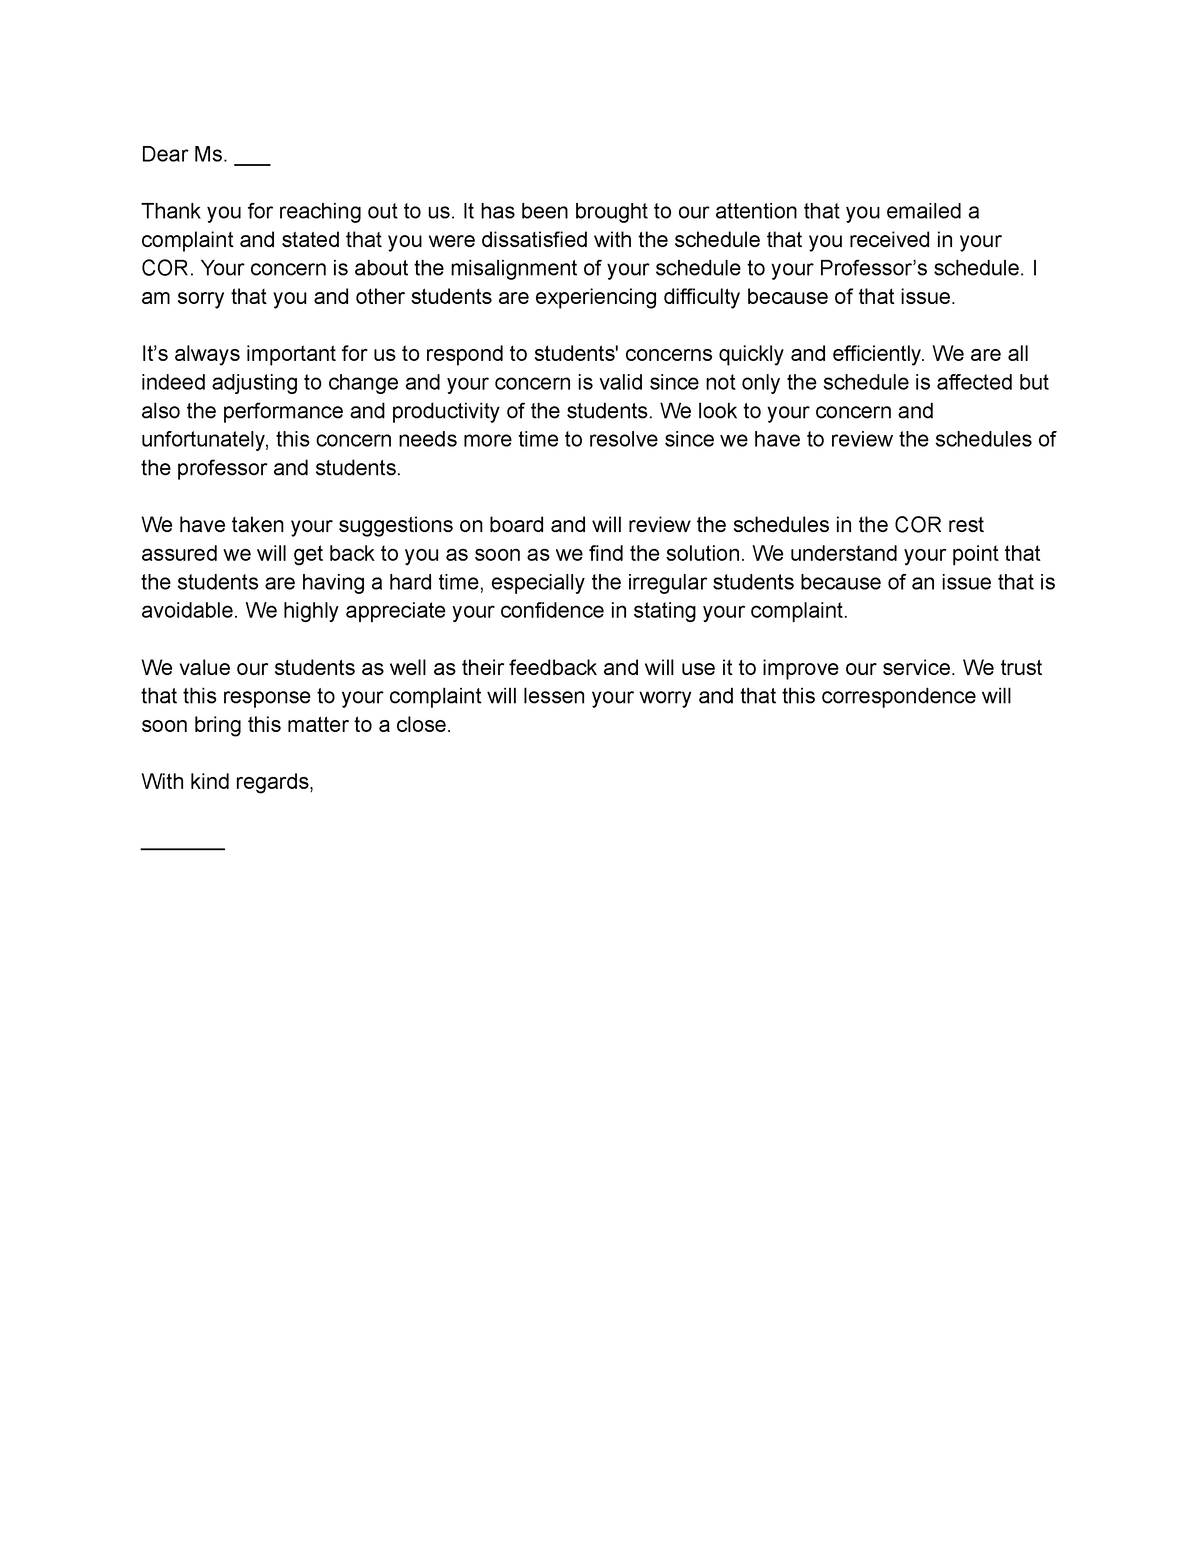 Response to A Complaint Letter - Dear Ms. ___ Thank you for reaching ...